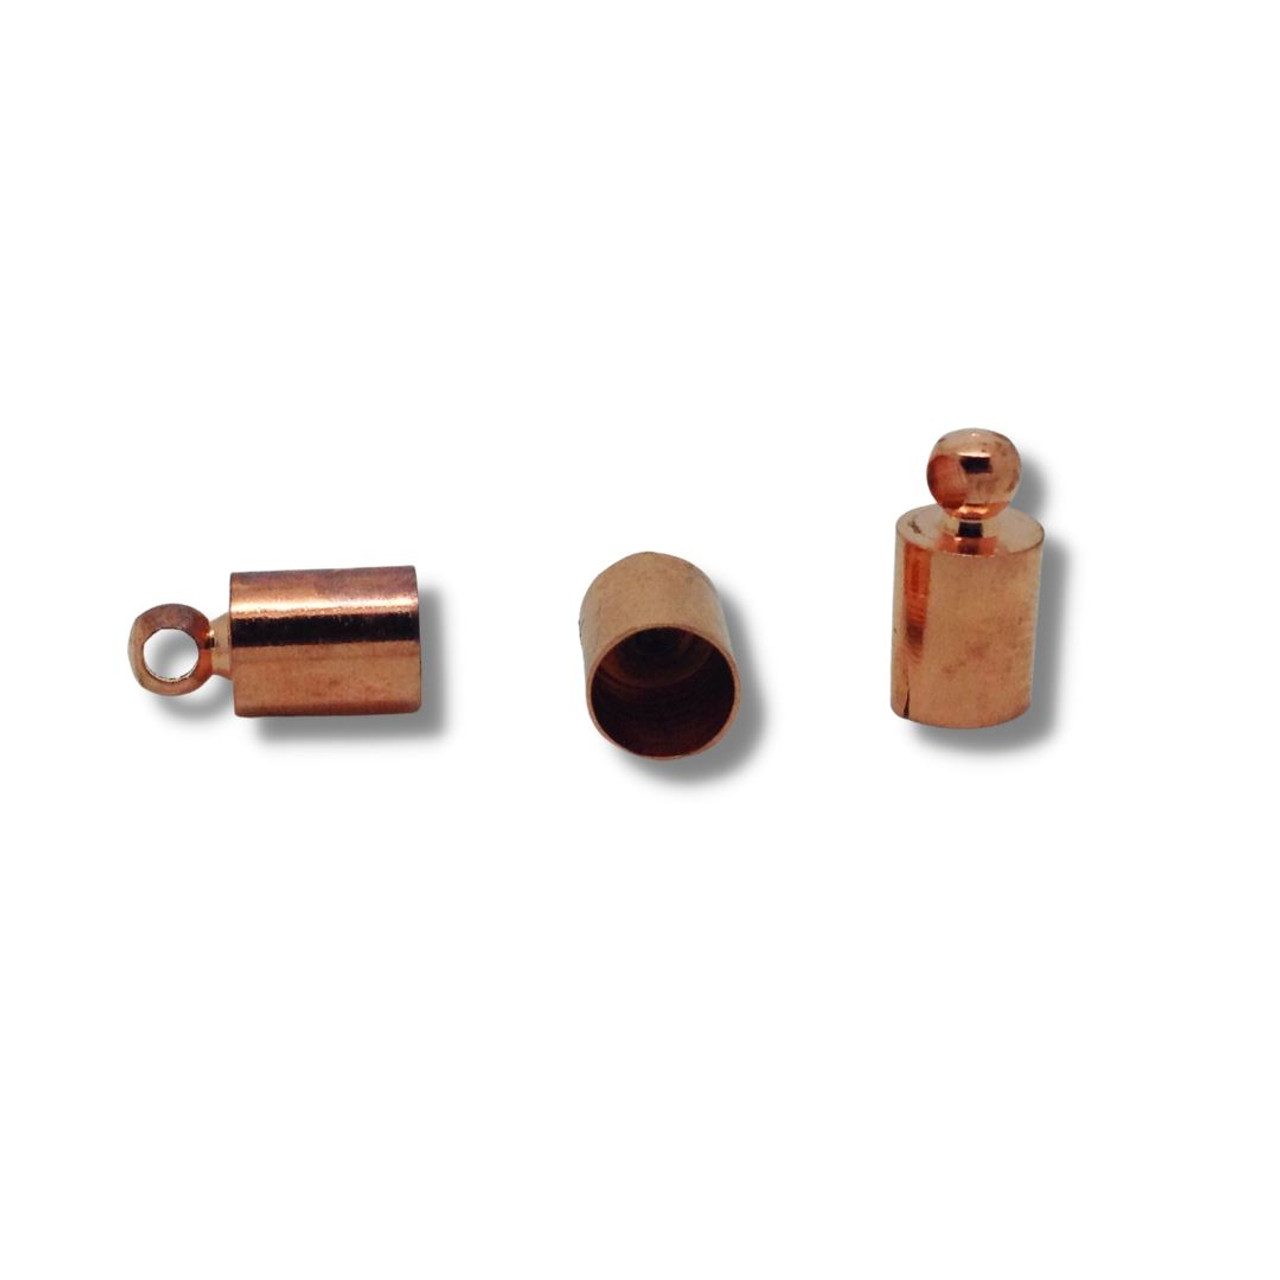 Brass Cord Ends 11mm x 6mm - Pack of 20, Rose Gold coloured